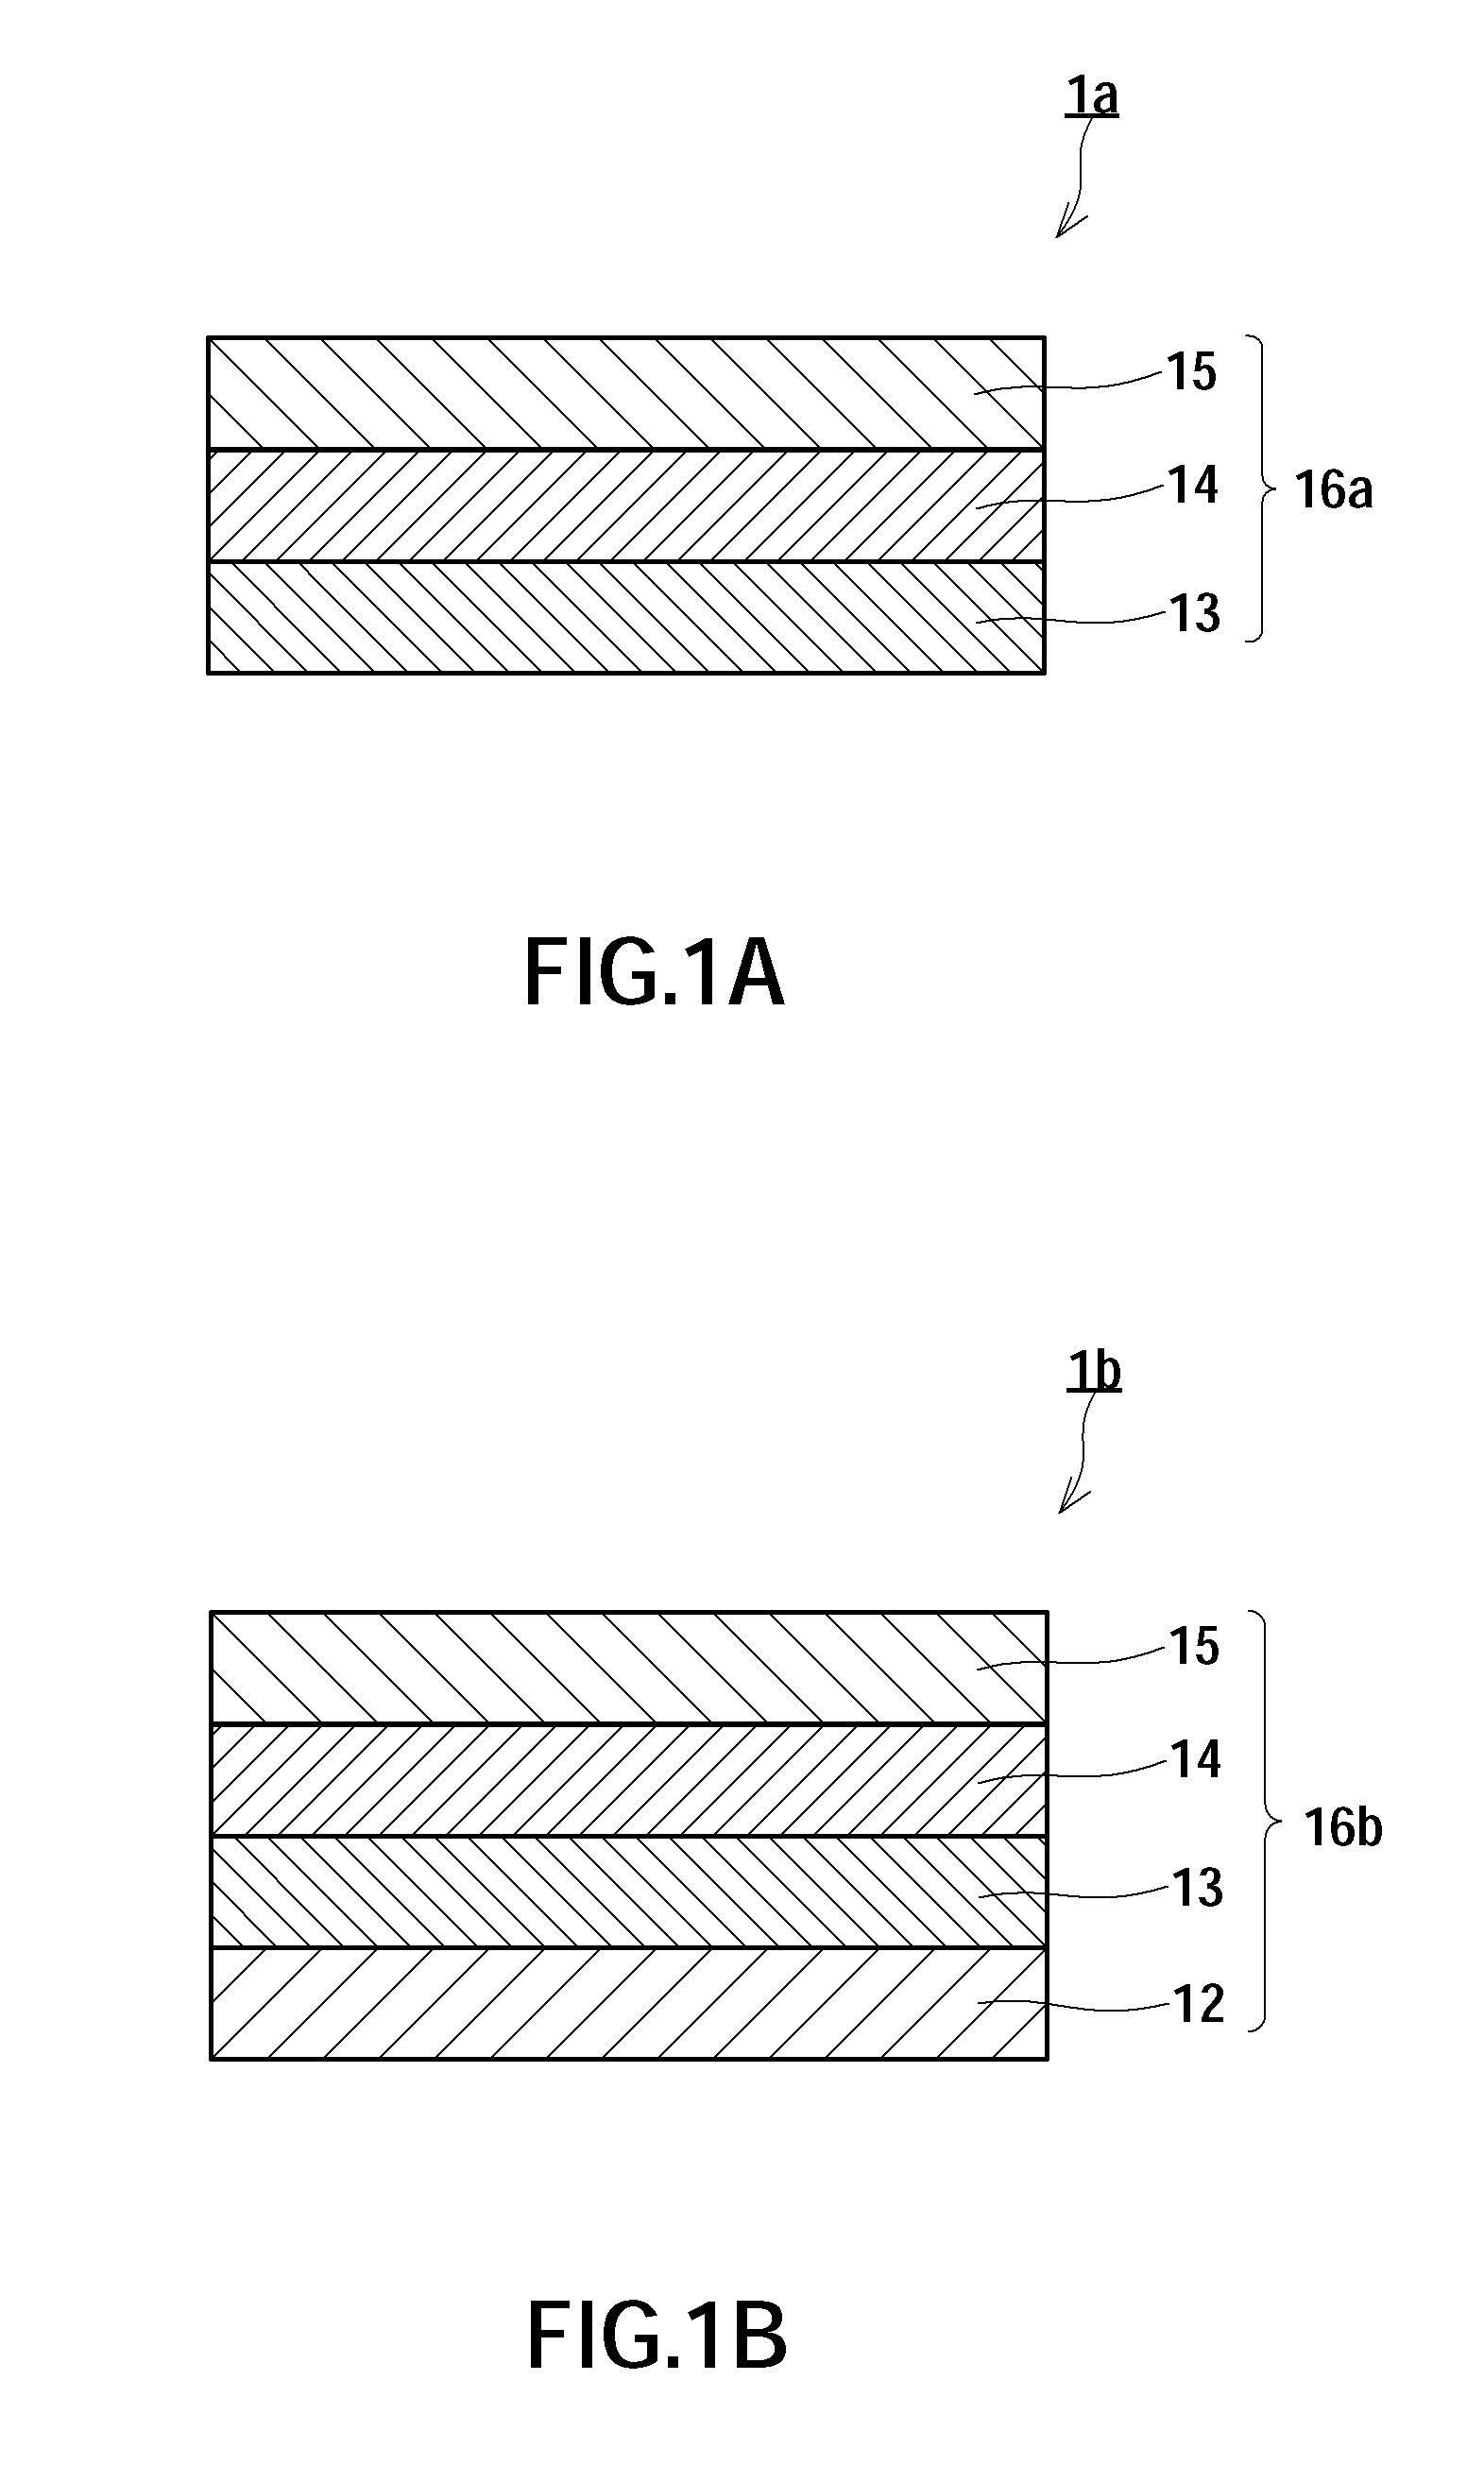 Piezoelectric thin film and method of manufacturing the same, ink jet head, method of forming image with the ink jet head, angular velocity sensor, method of measuring angular velocity with the angular velocity sensor, piezoelectric generating element, and method of generating electric power with the piezoelectric generating element